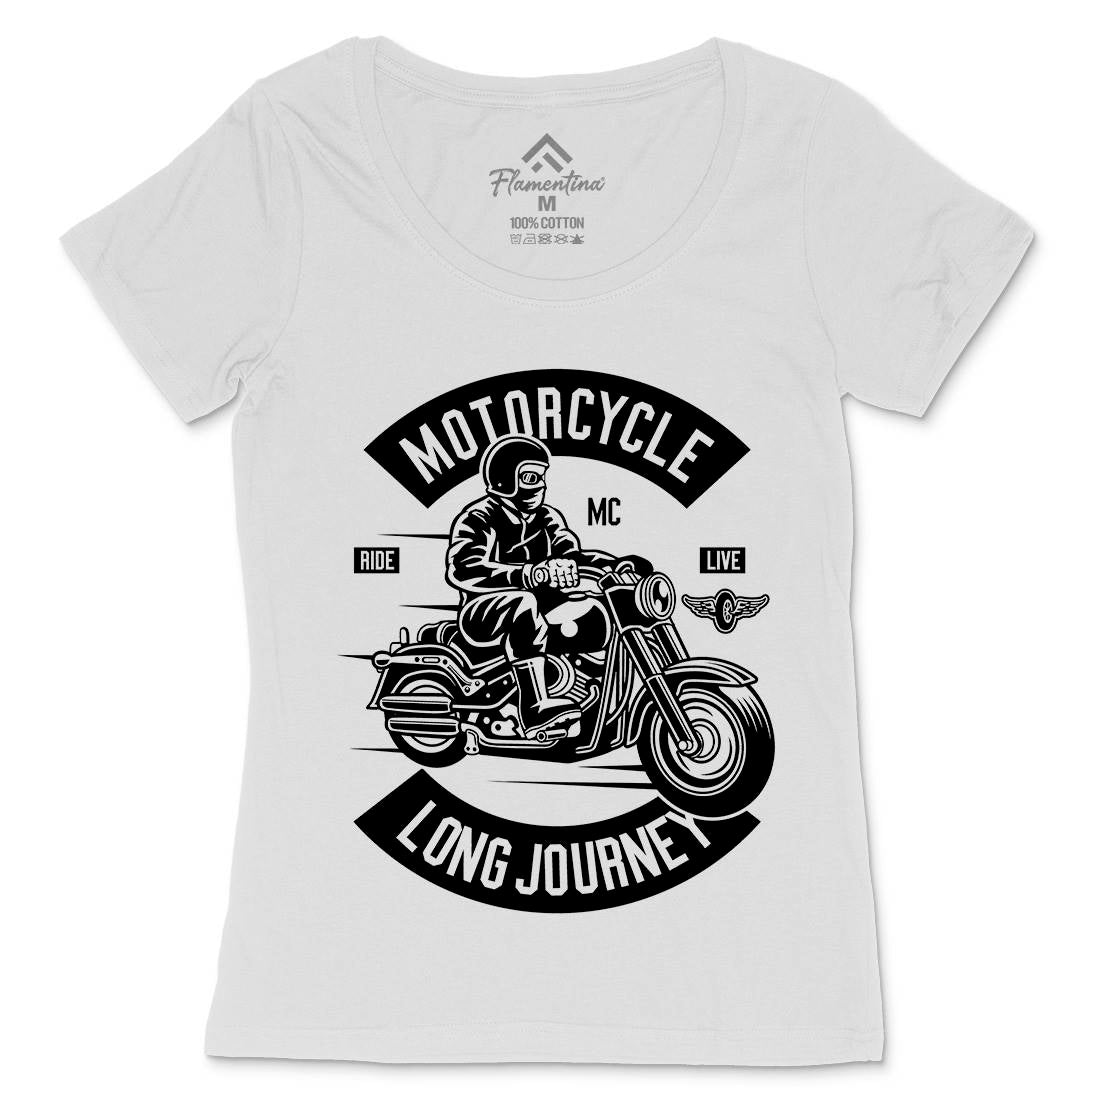 Long Journey Womens Scoop Neck T-Shirt Motorcycles B583